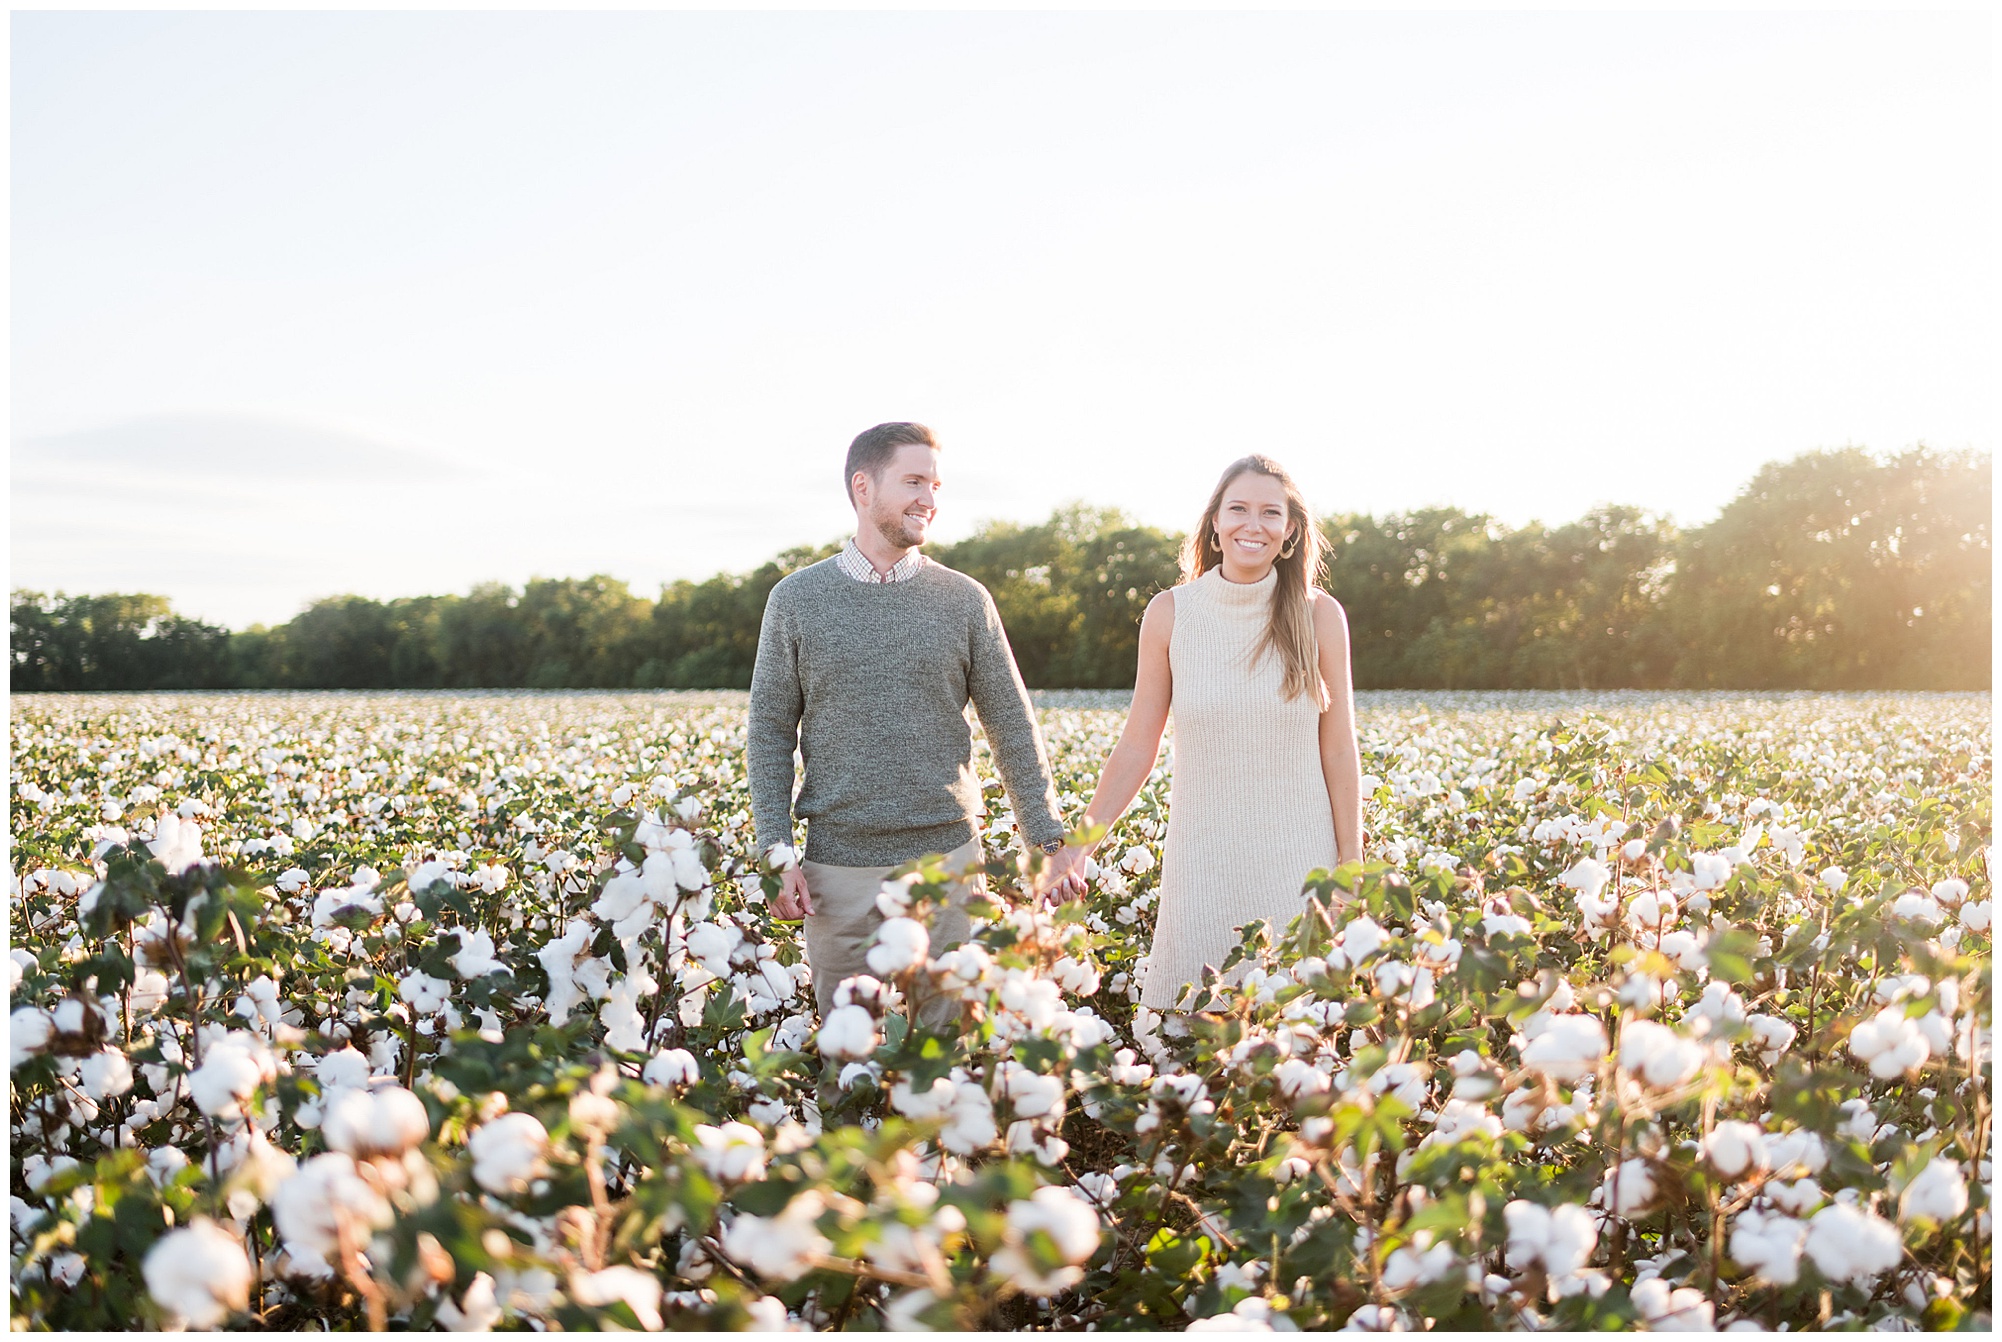 cotton field engagement session at shirley plantation near upper shirley vineyards. in the fall. in october. by richmond rva wedding photographer, sarah & dave photography